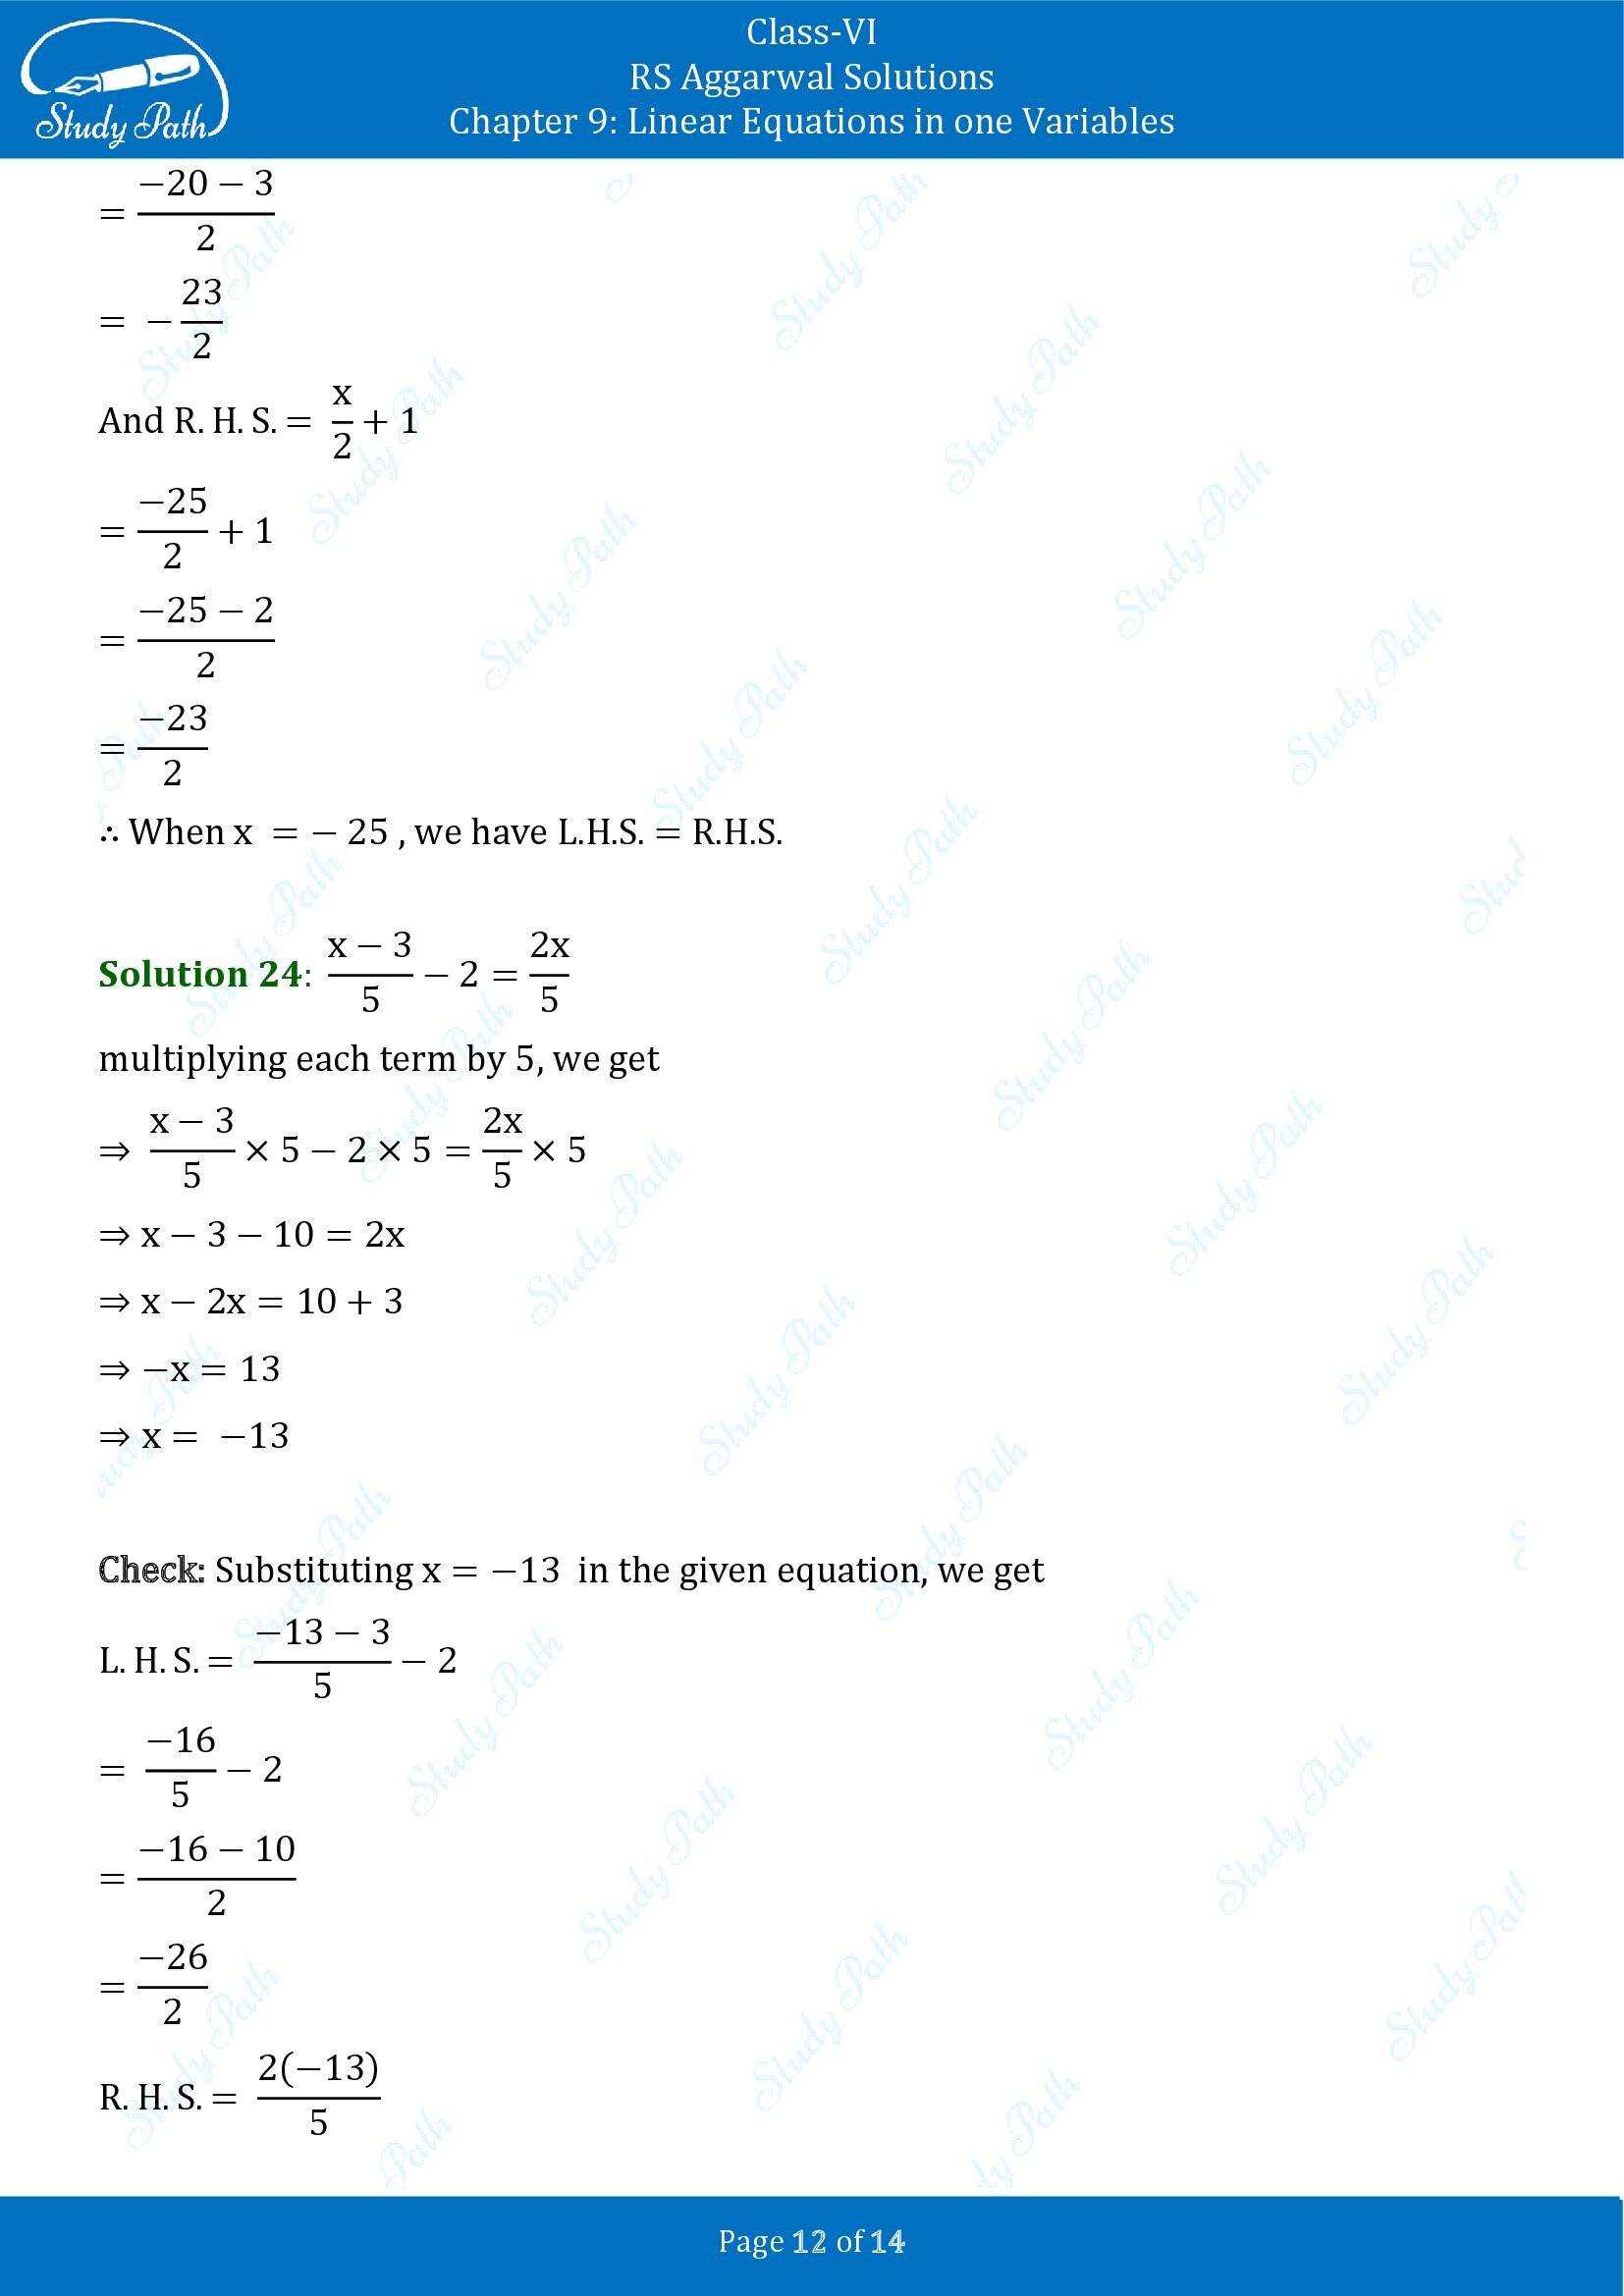 RS Aggarwal Solutions Class 6 Chapter 9 Linear Equations in One Variable Exercise 9B 00012